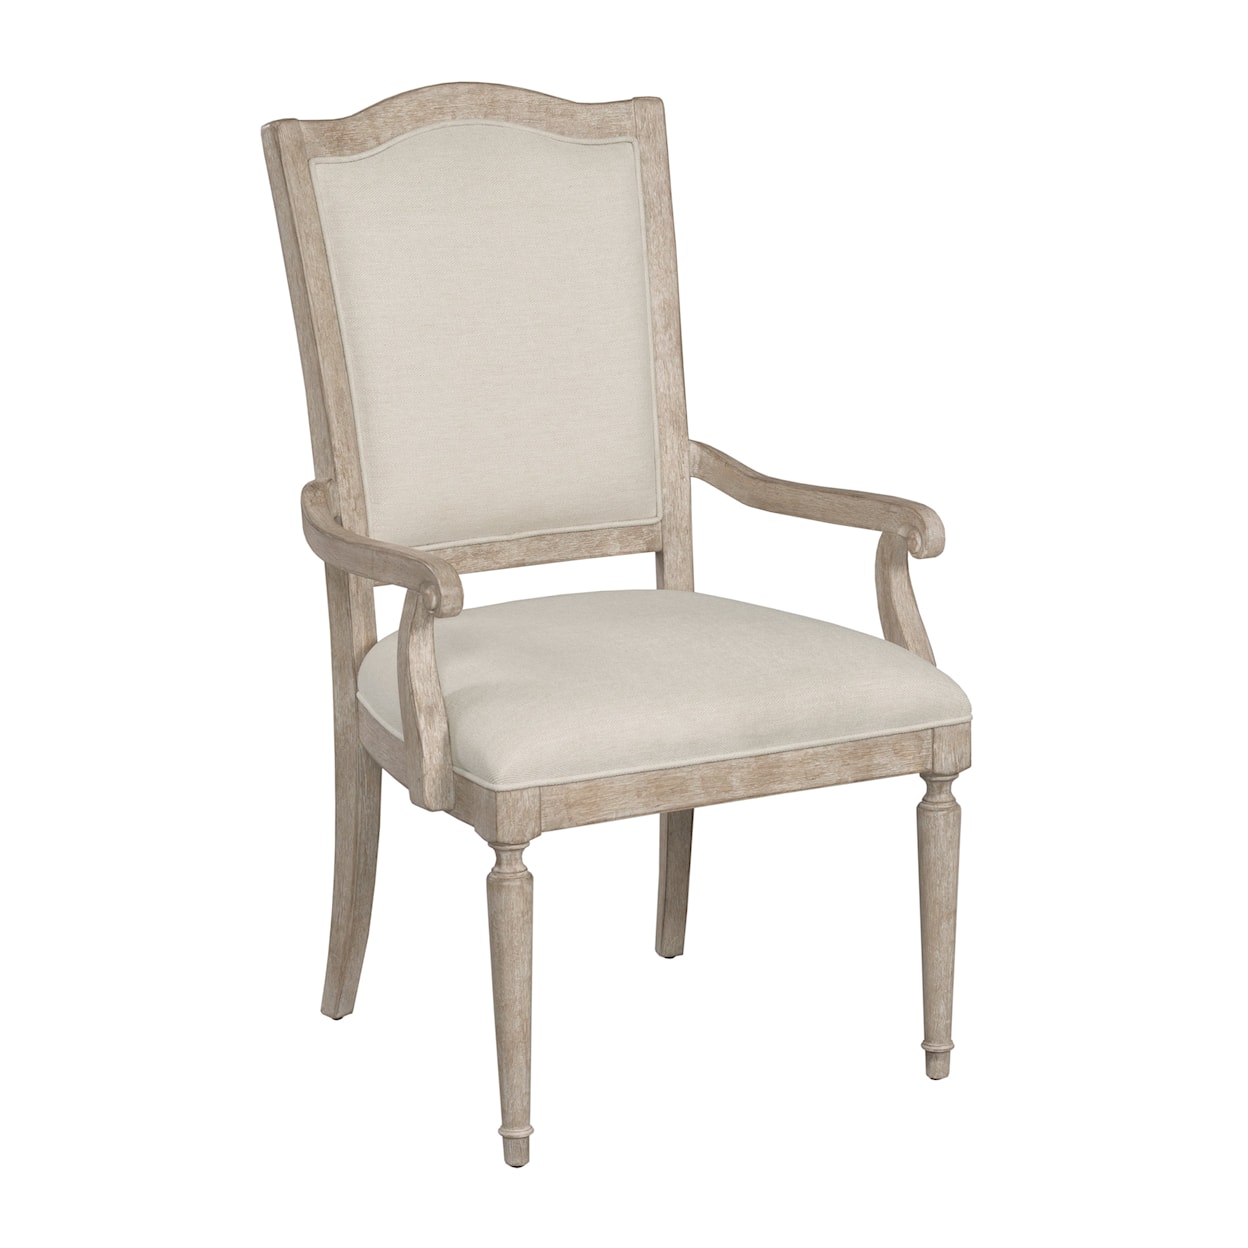 American Drew Cambric Upholstered Arm Chair